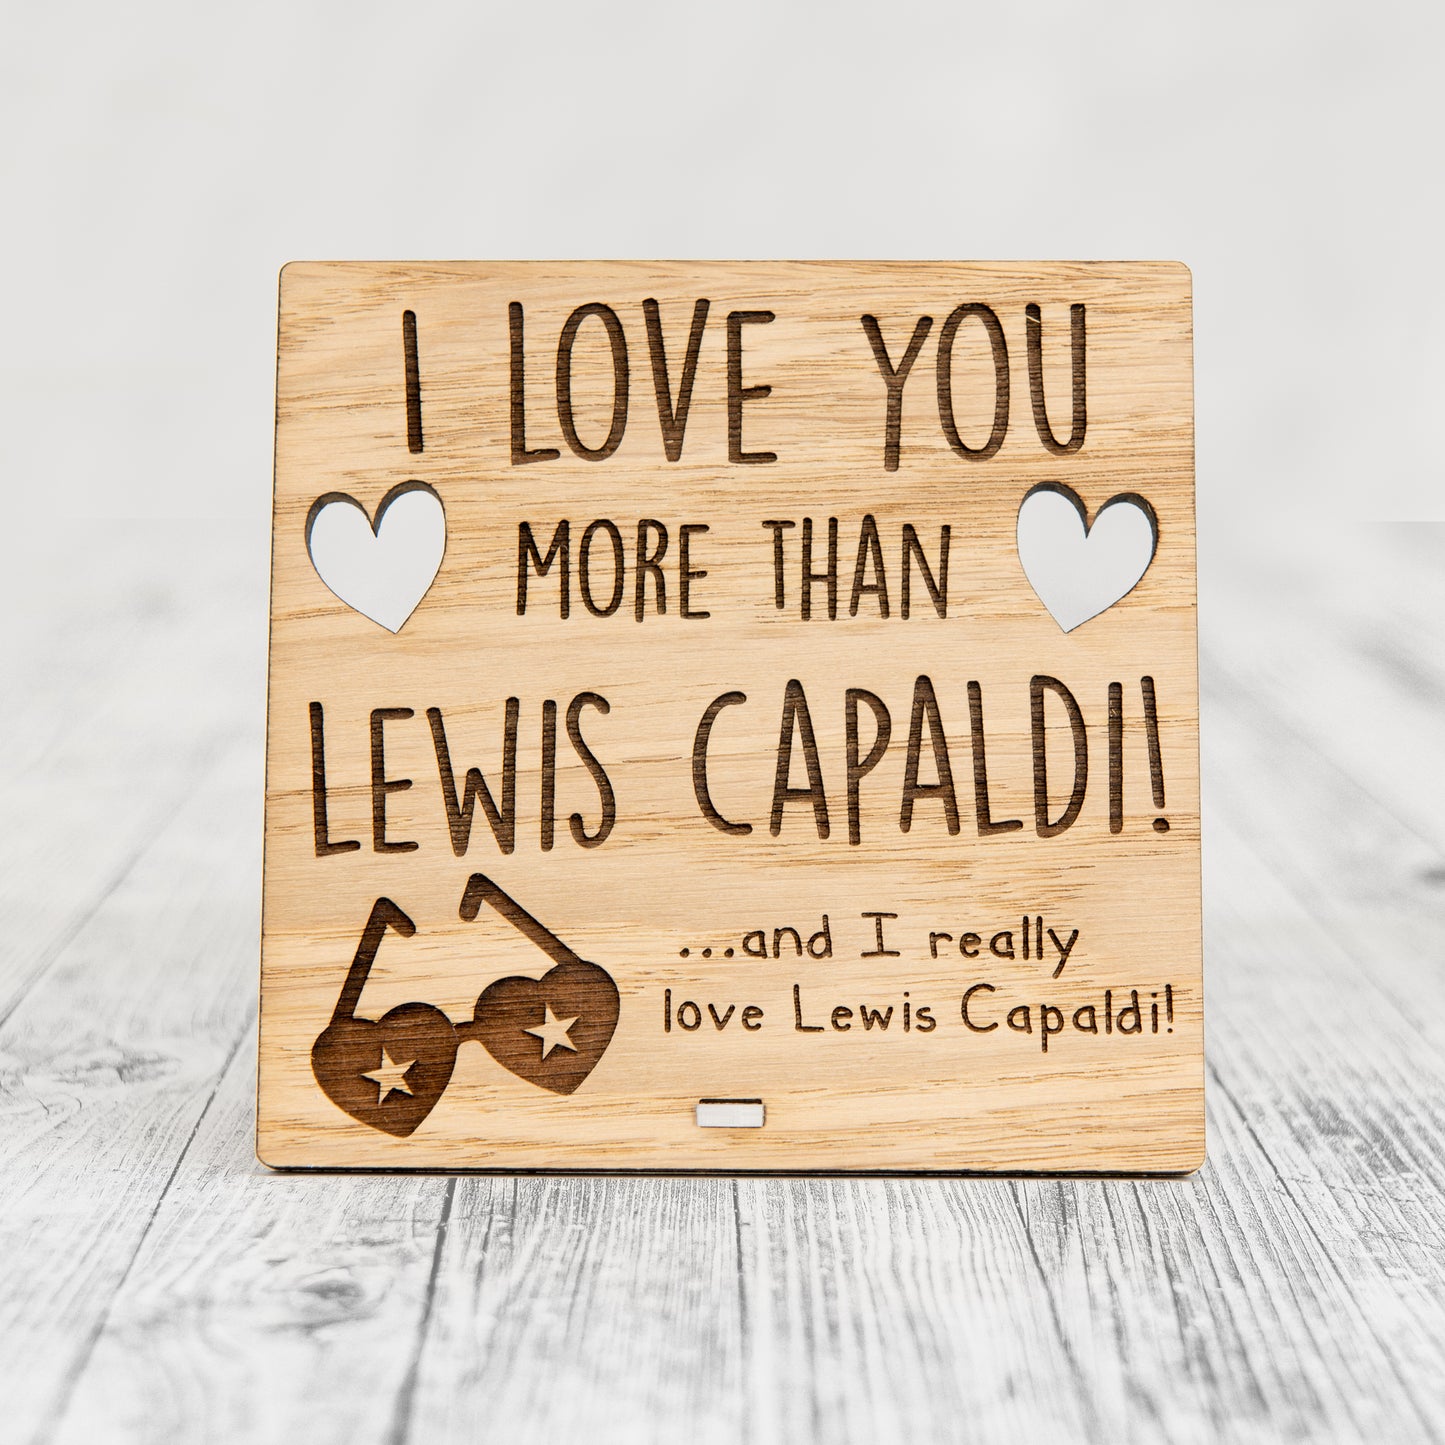 I Love You More Than LEWIS CAPALDI - Wooden Valentine's Day Plaque